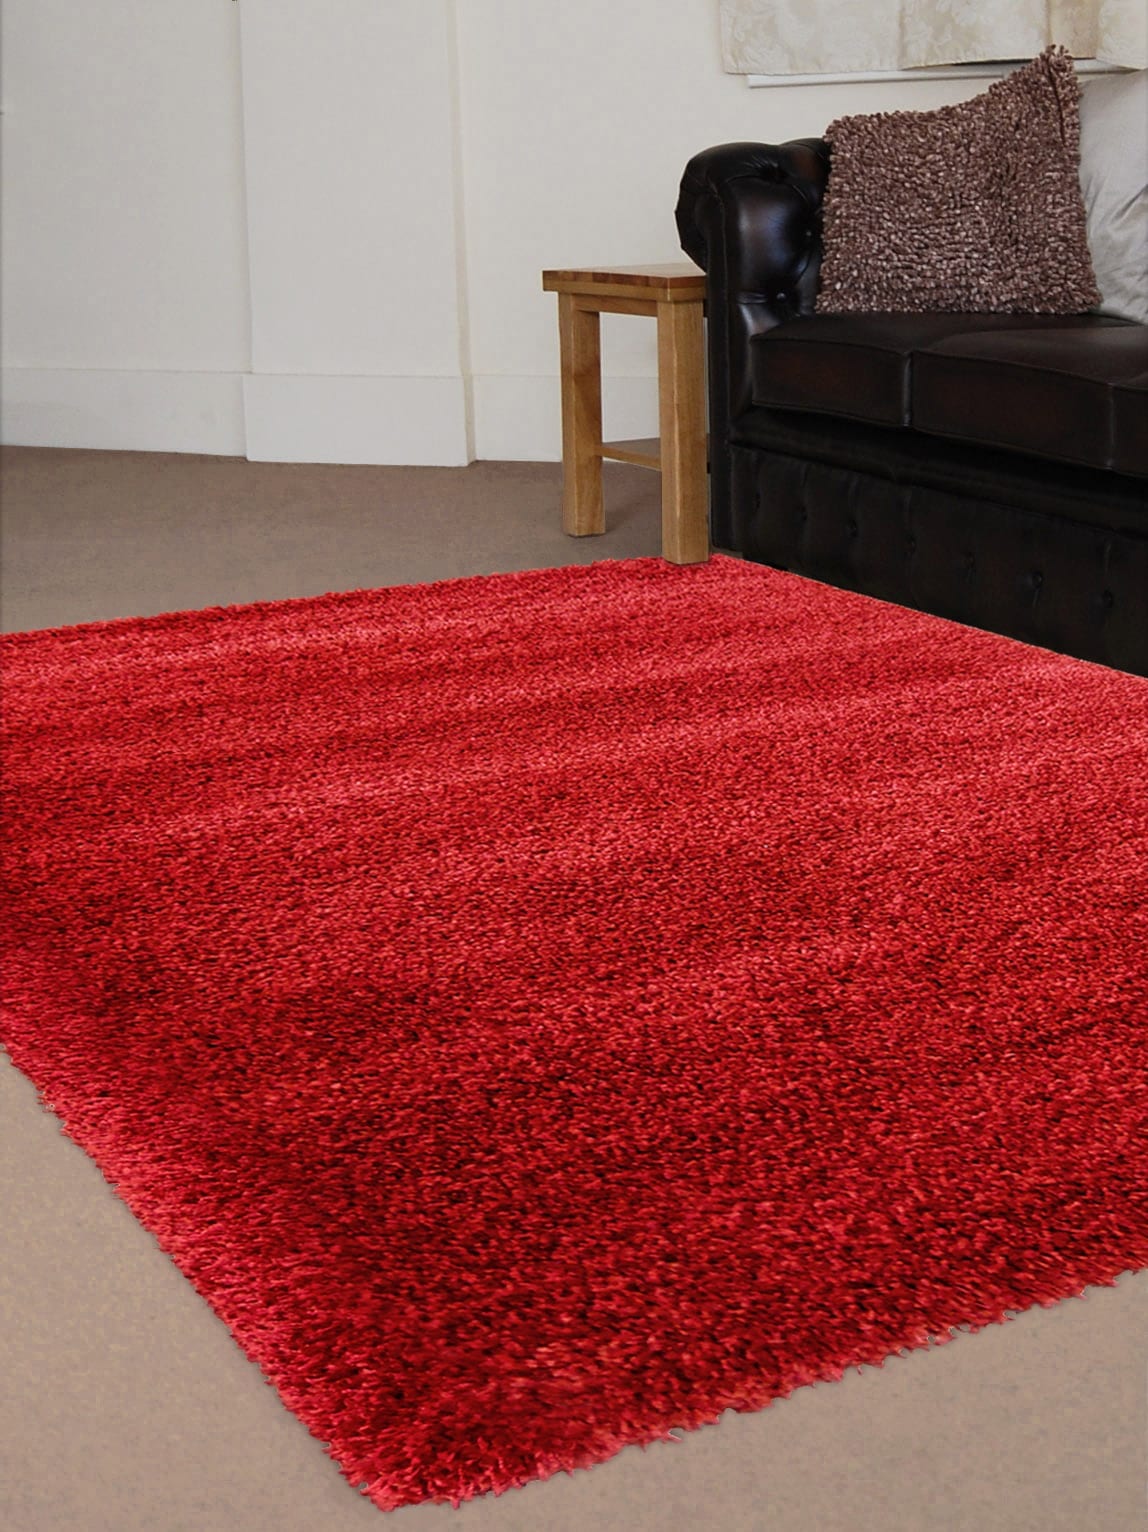 Libertyville Area Rug Cleaning Services